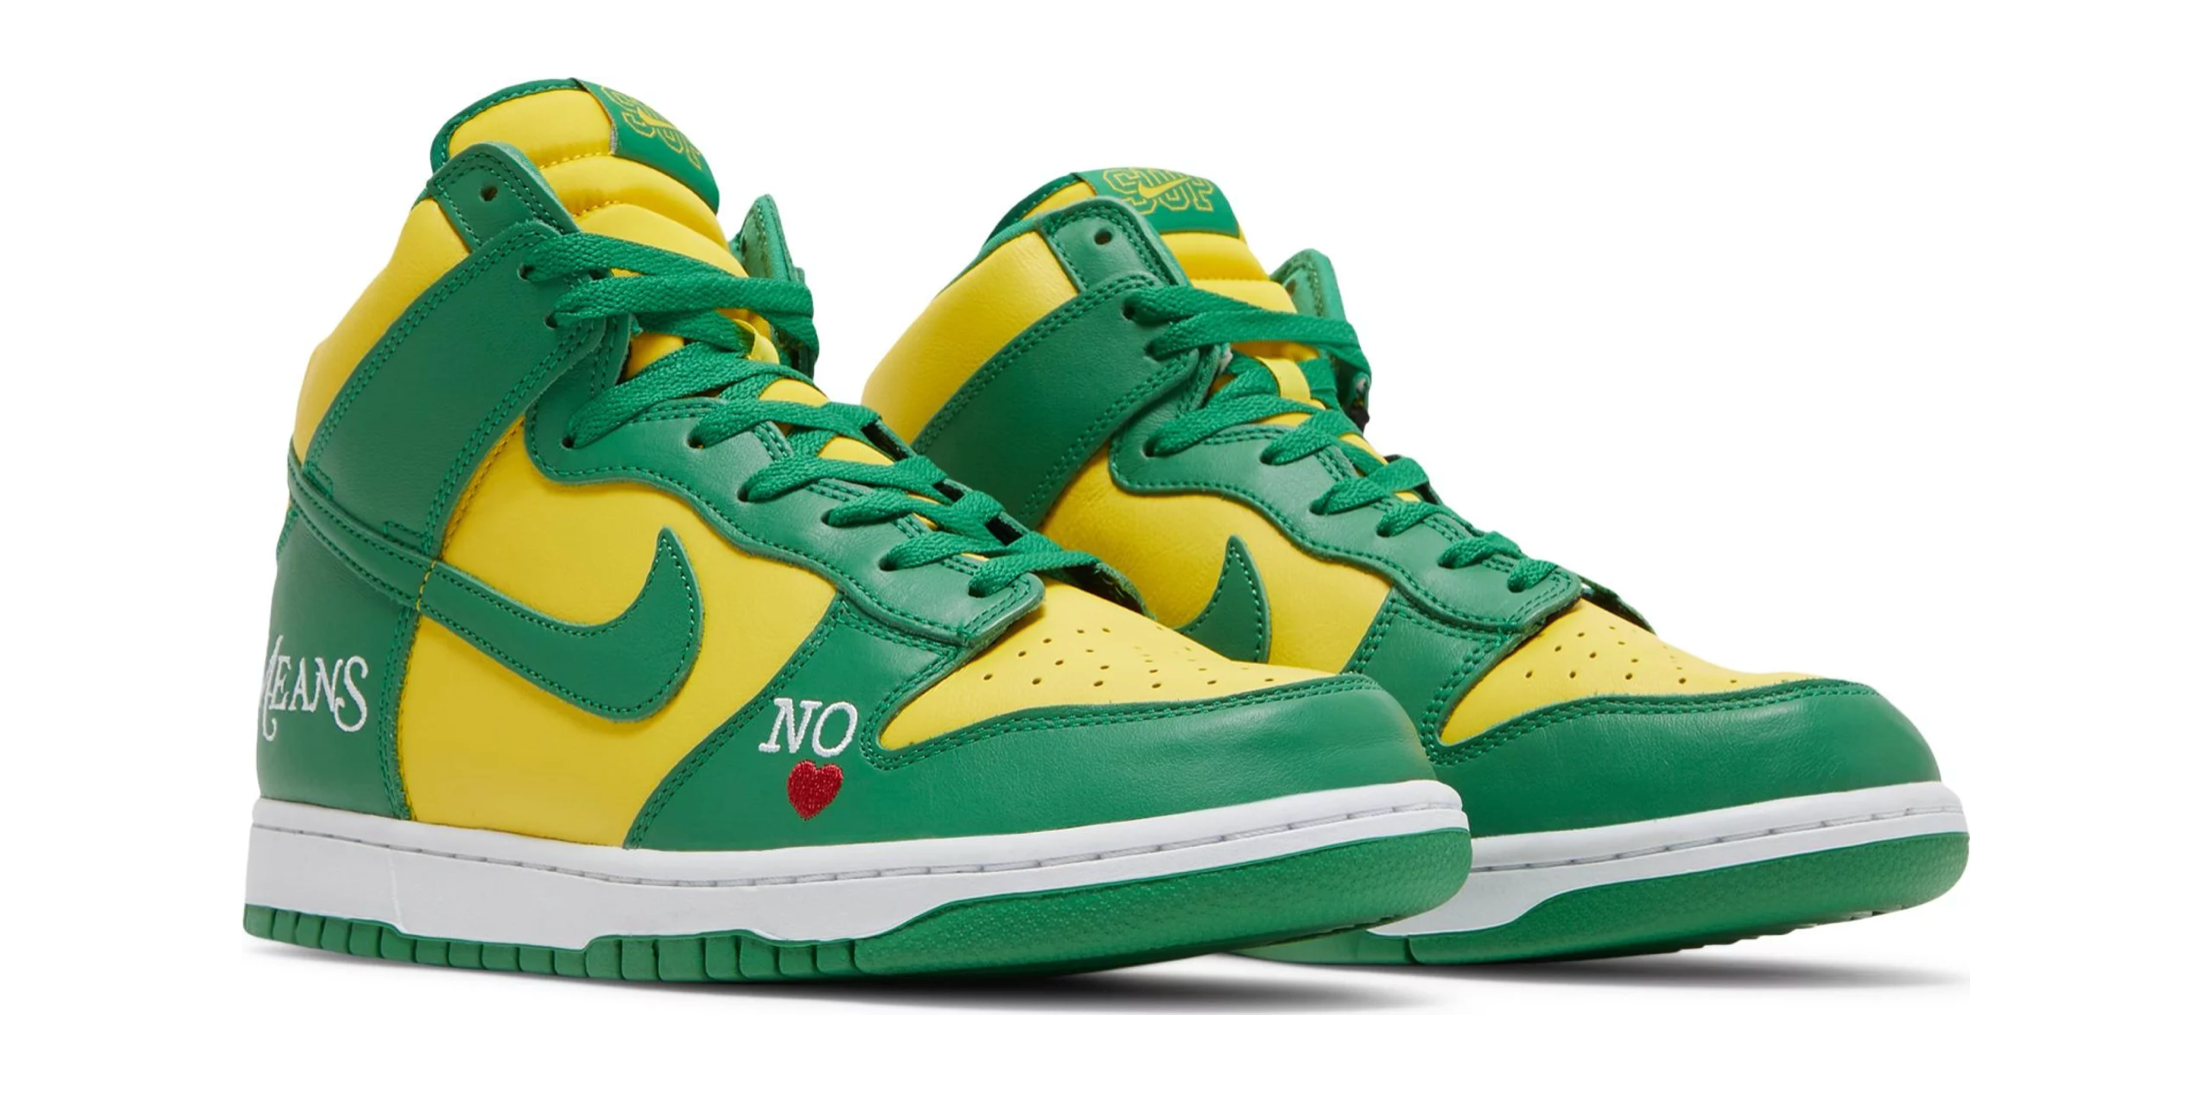 NIKE SB DUNK HIGH SUPREME BY ANY MEANS BRAZIL